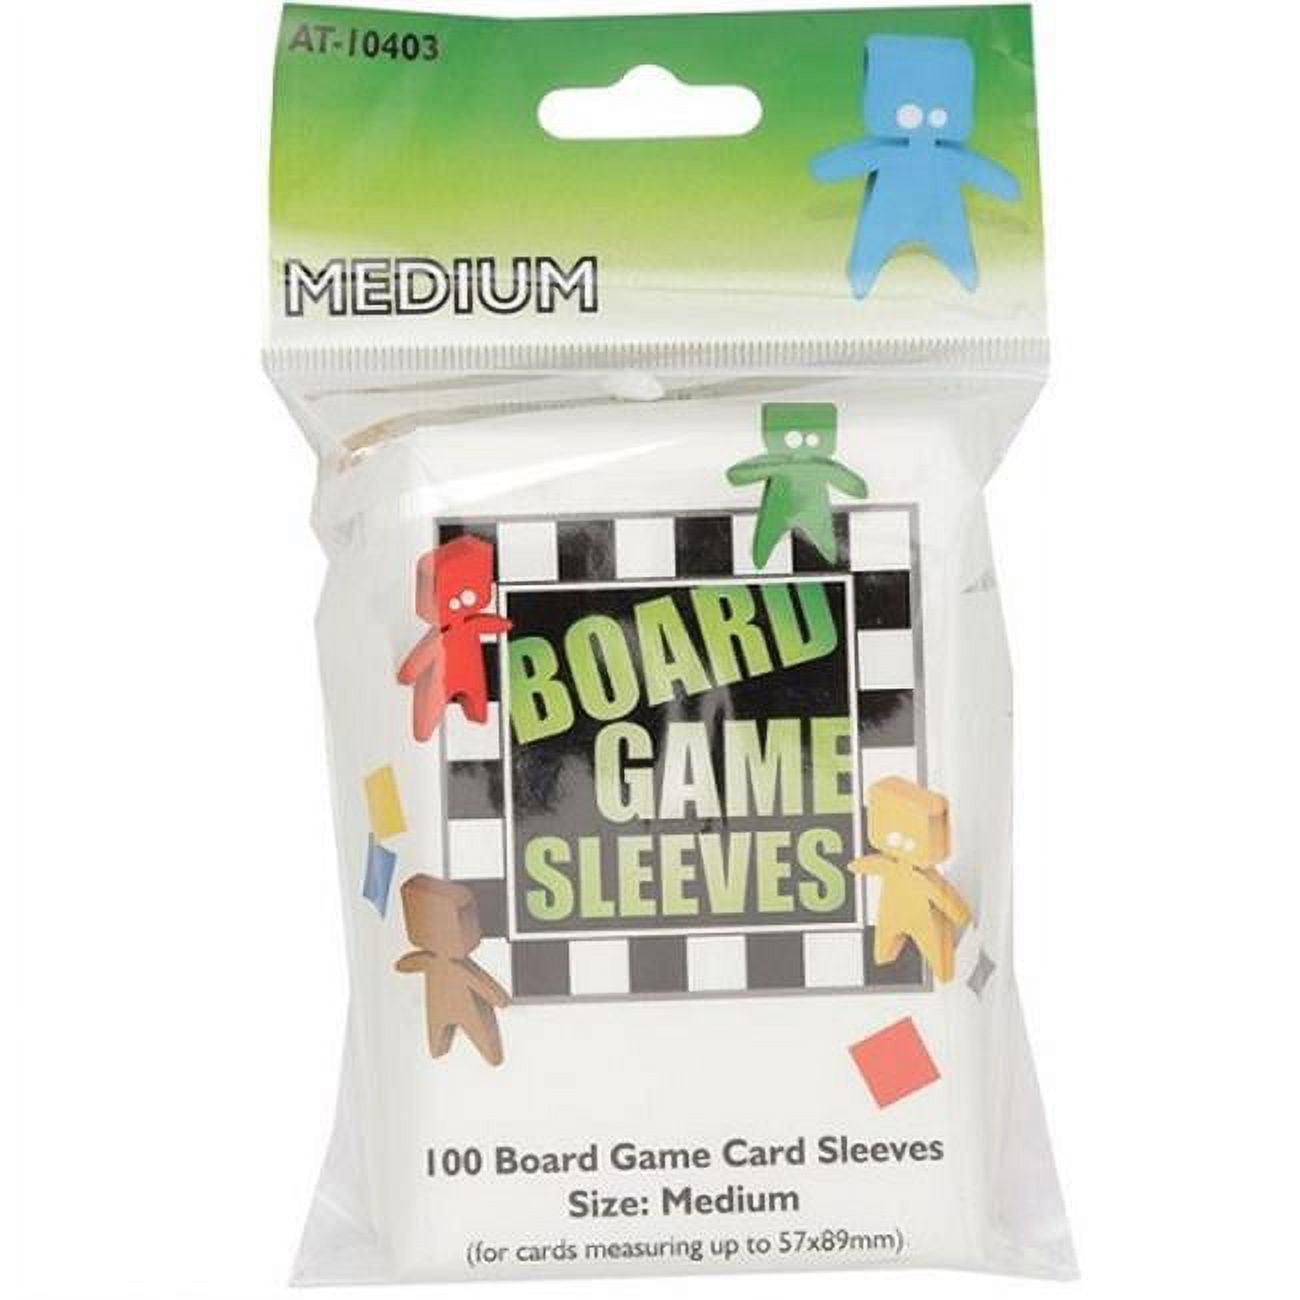 Atm10403 Medium Board Game Card Sleeves Box, Green - 100 Count